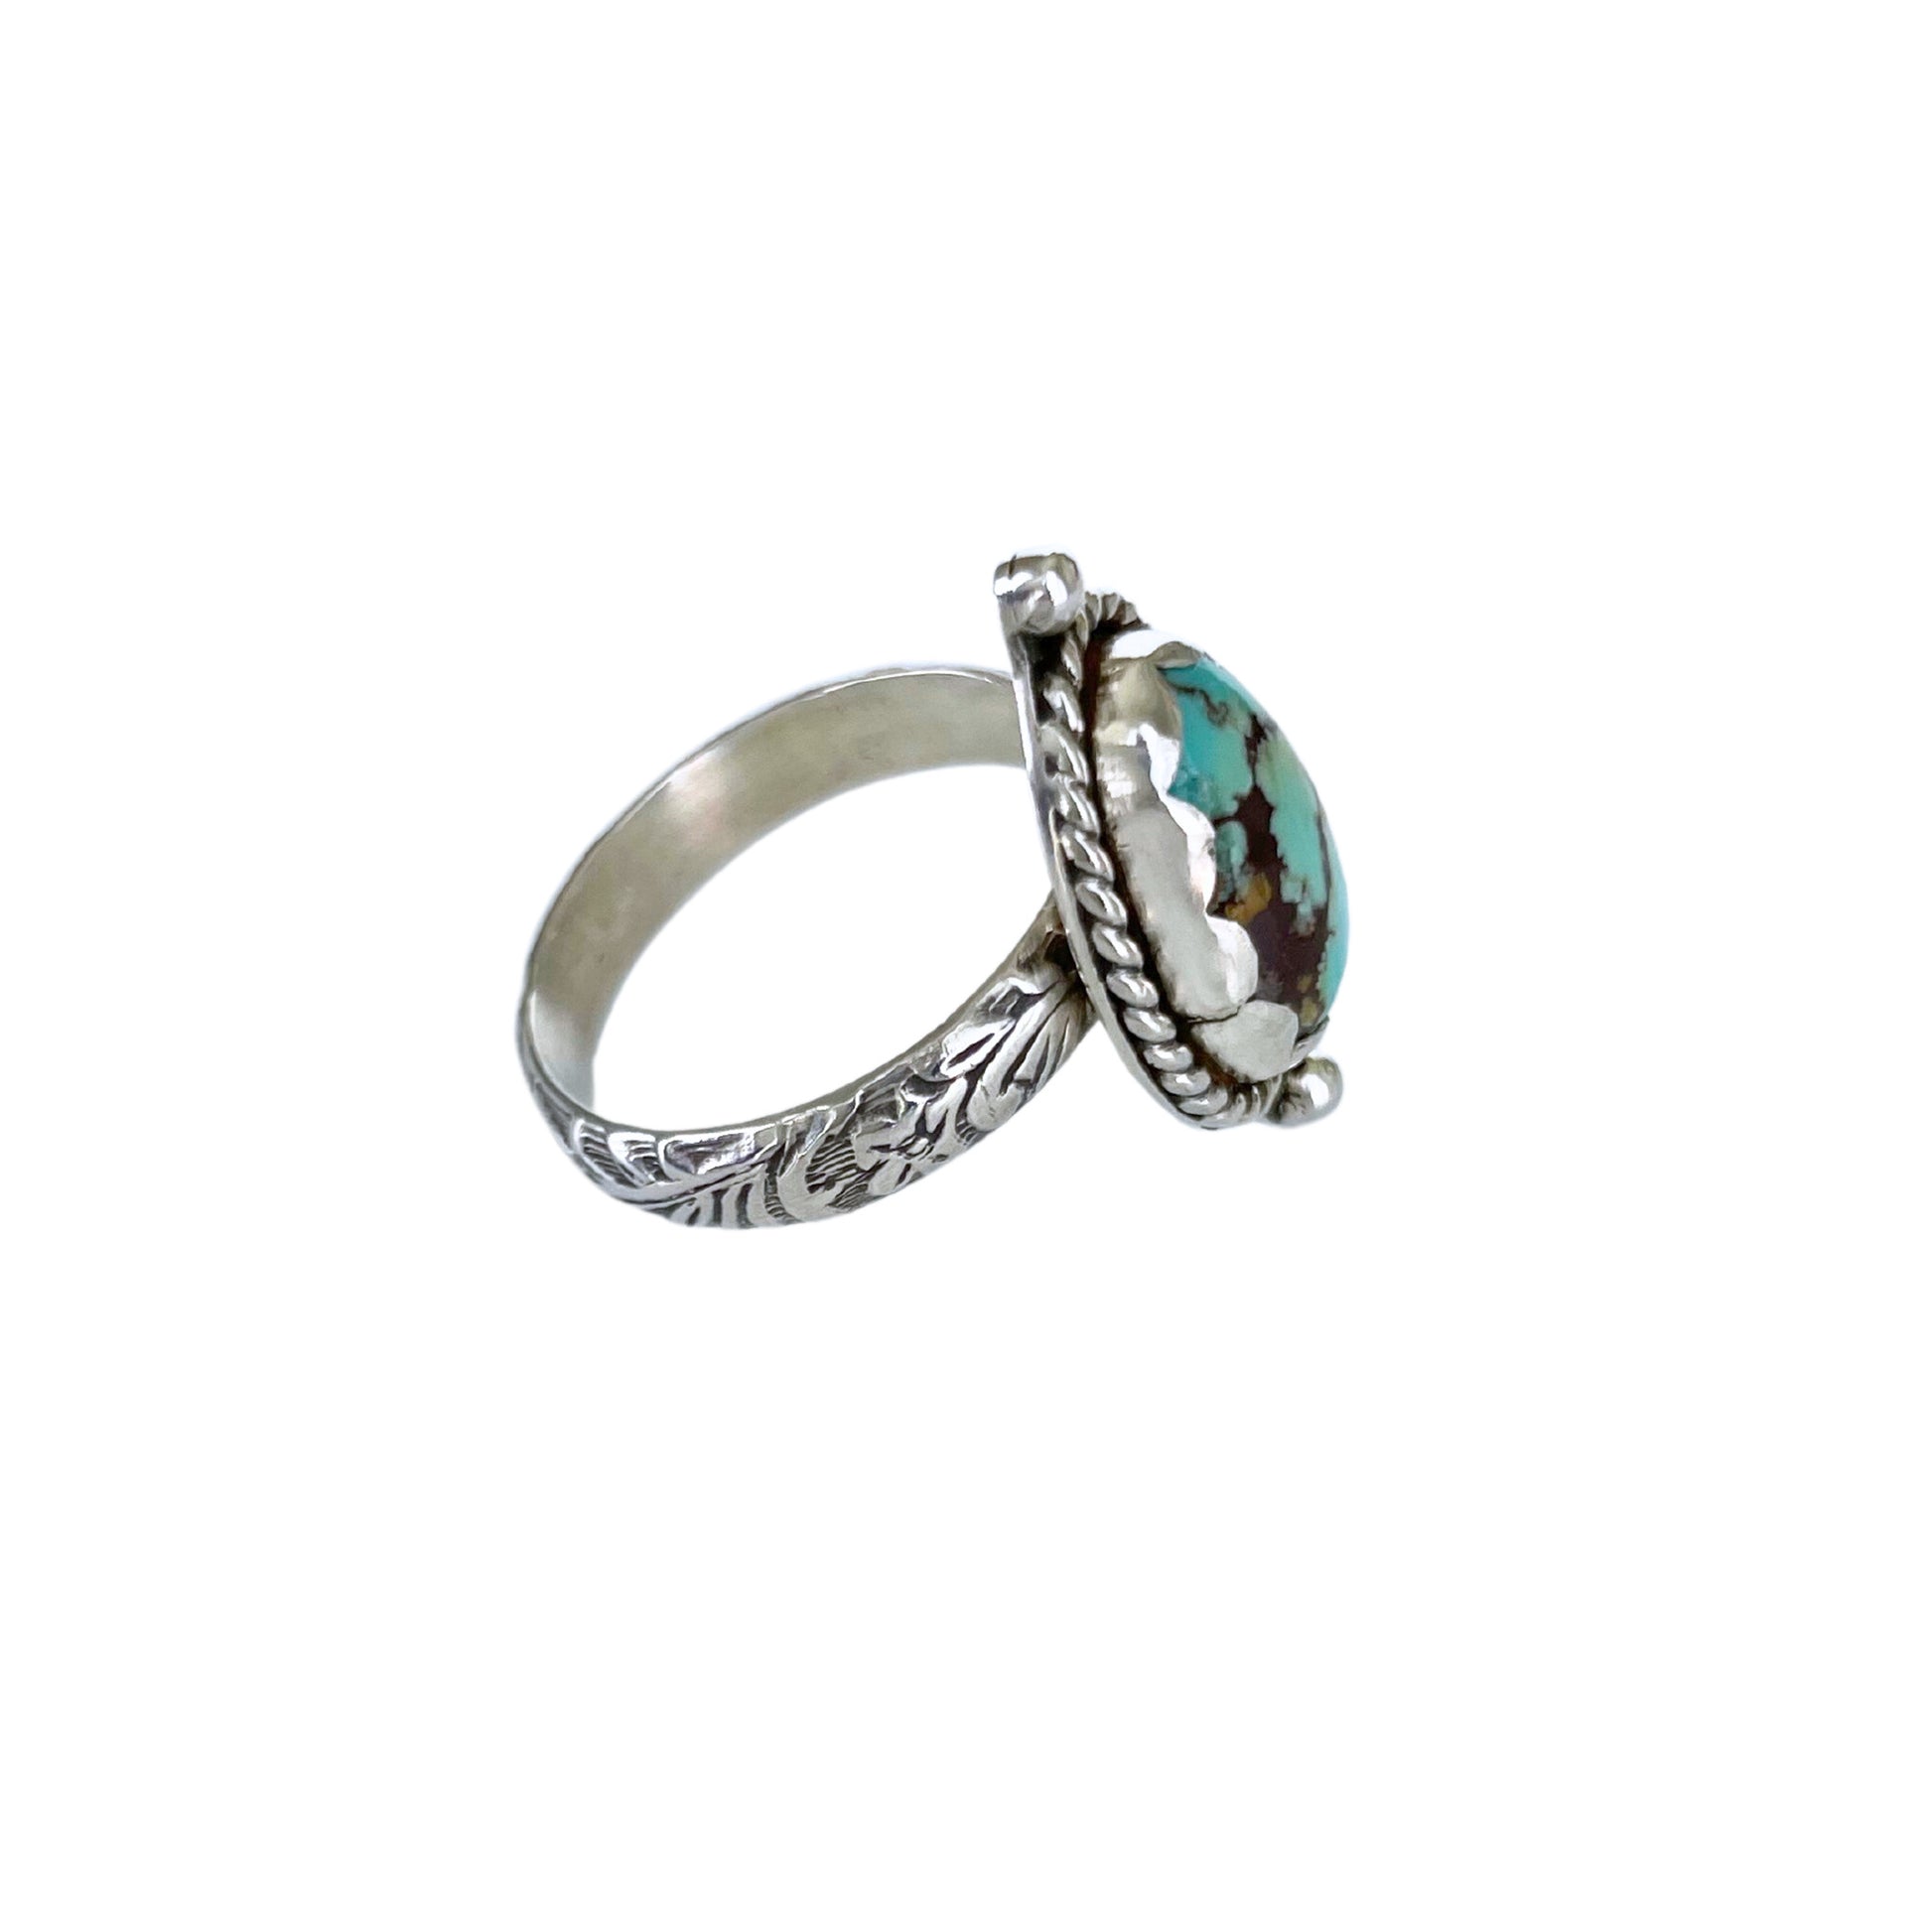 Golden Hills Turquoise Sterling Silver Ring, Size 8 - side view with beautiful floral and foliage embellished band.